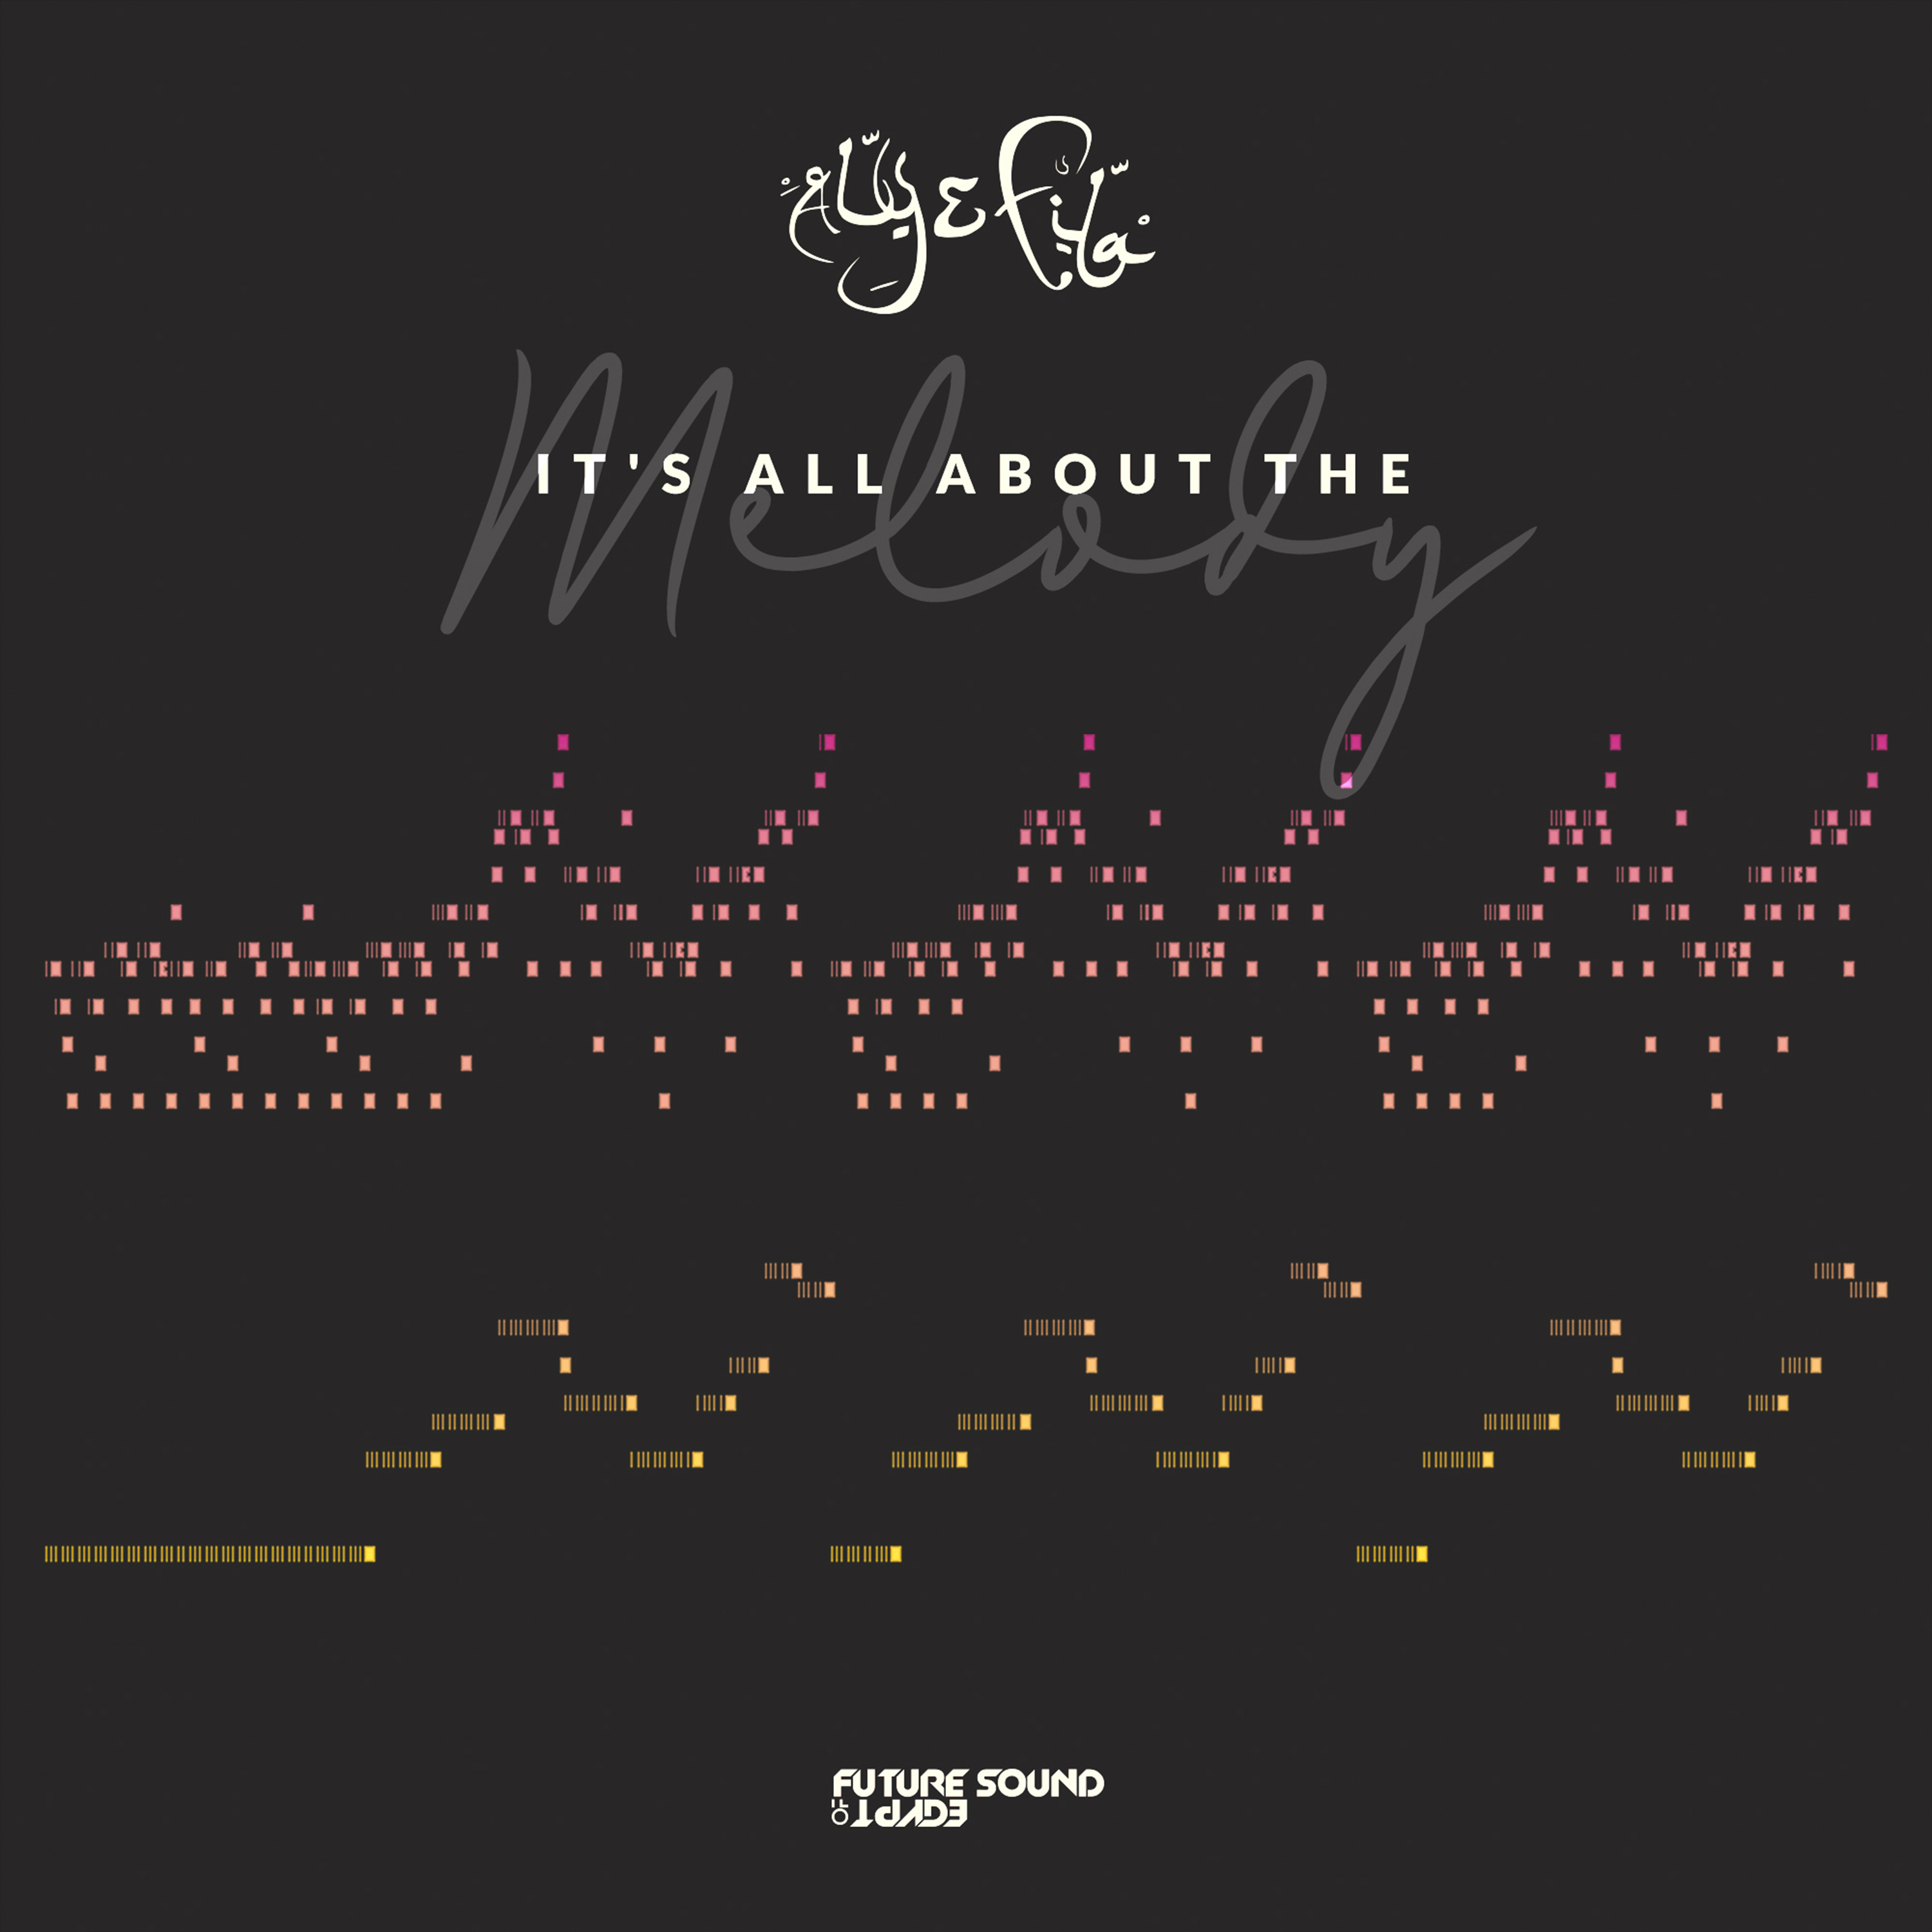 ALY & FILA RELEASE FIRST SINGLE FROM THEIR SIXTH ARTIST ALBUM – ‘IT’S ALL ABOUT THE MELODY’